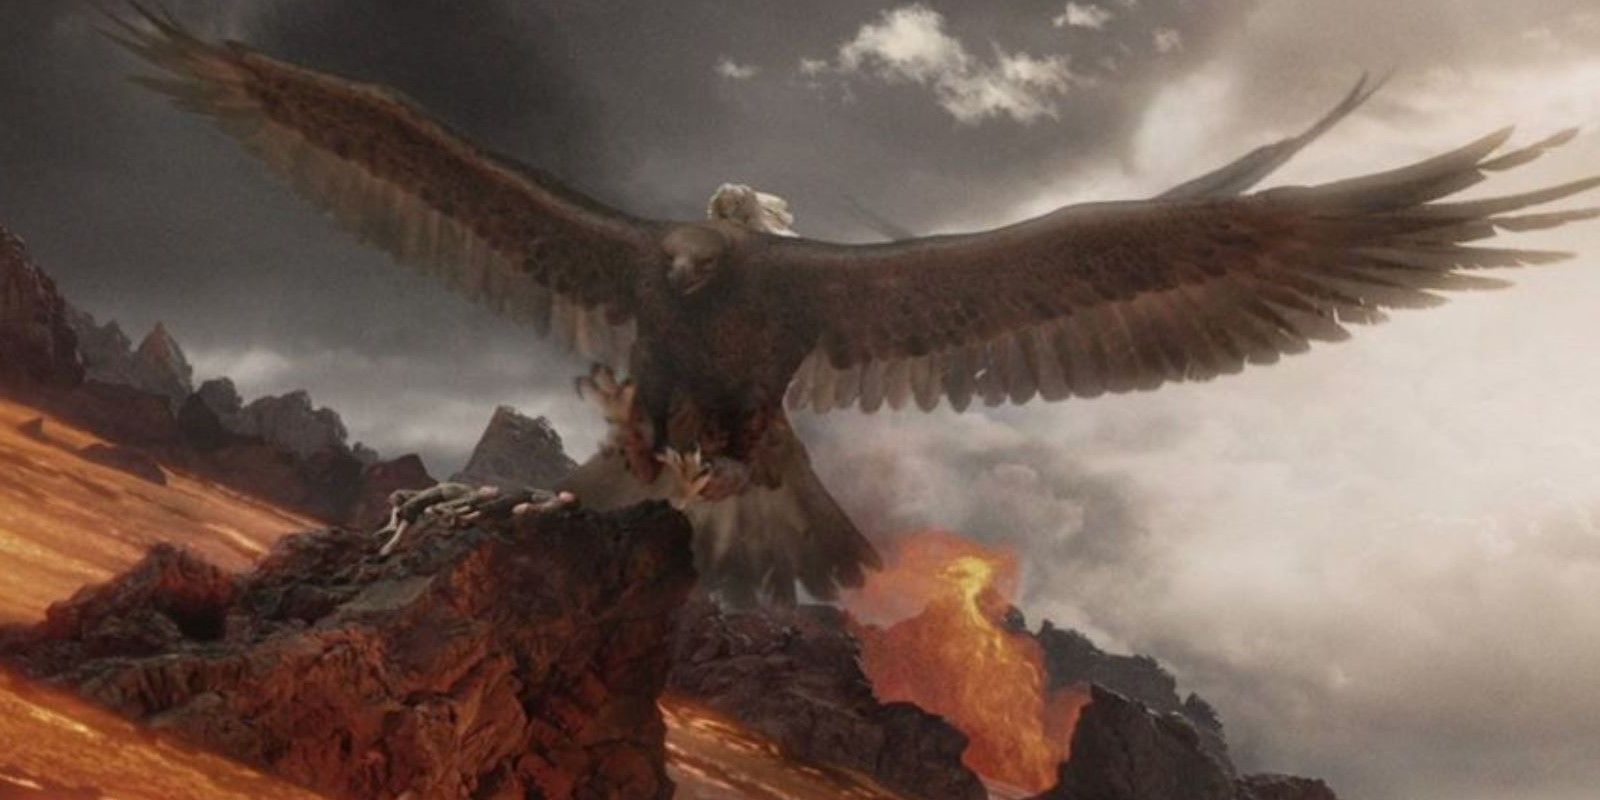 Why Didn t The Eagles Just Fly Frodo And Sam To Mount Doom In The Beginning